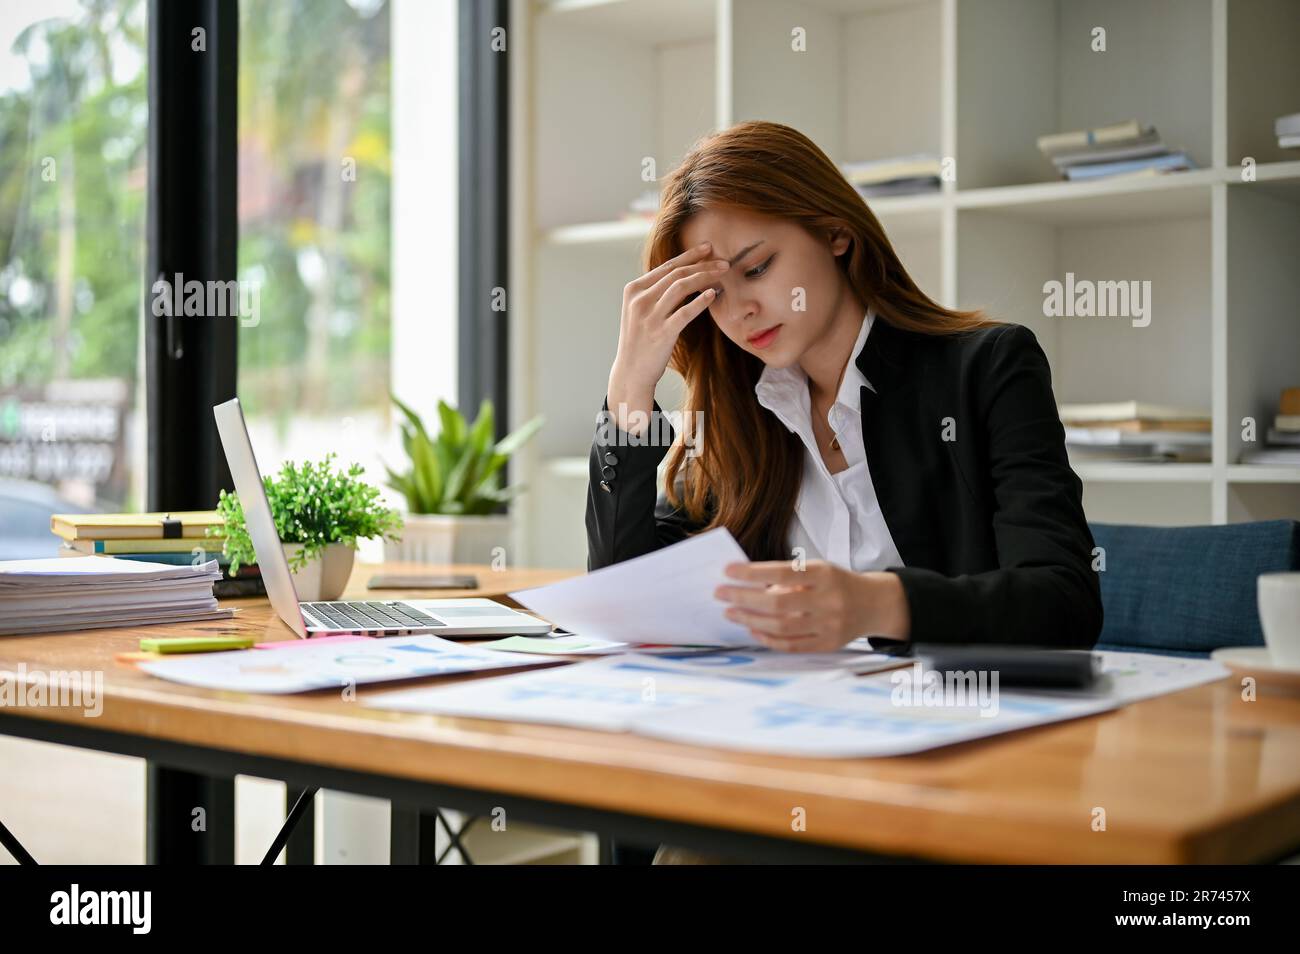 A stressed and serious Asian businesswoman suffers from headaches or eye stains while focusing on reading a business financial report at her desk in t Stock Photo